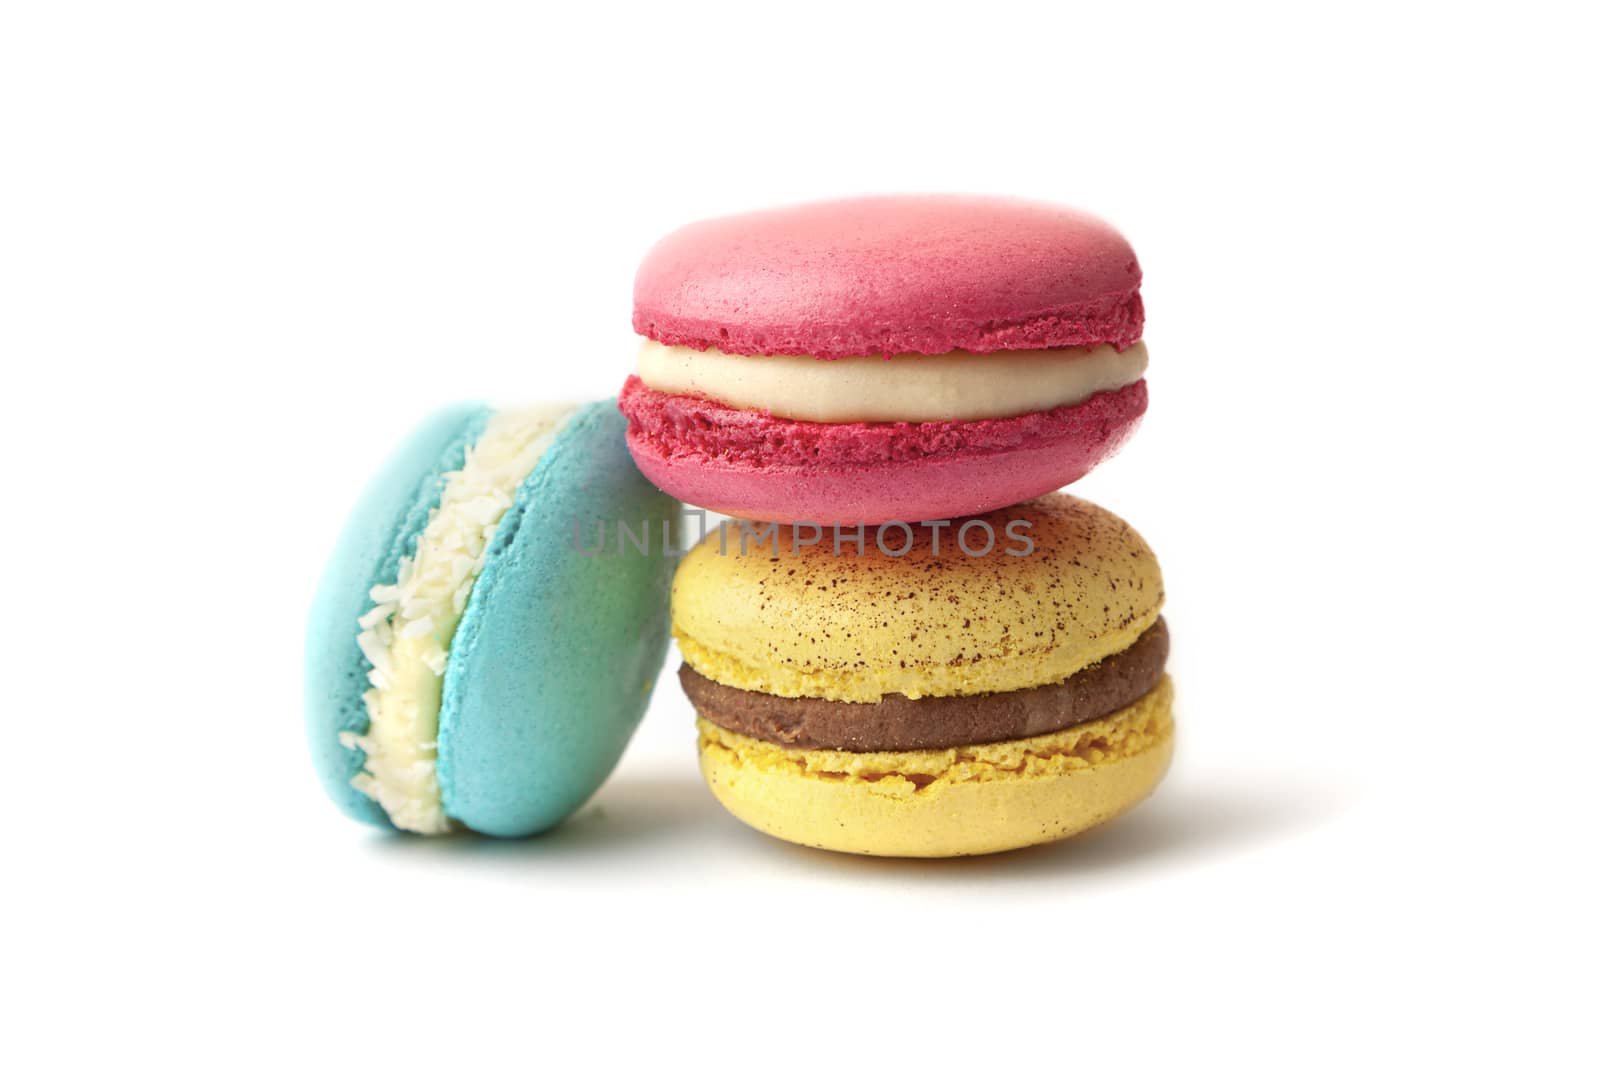 Colorful macarons cakes. Small French cakes. Sweet and colorful french macaroons isolated on white background